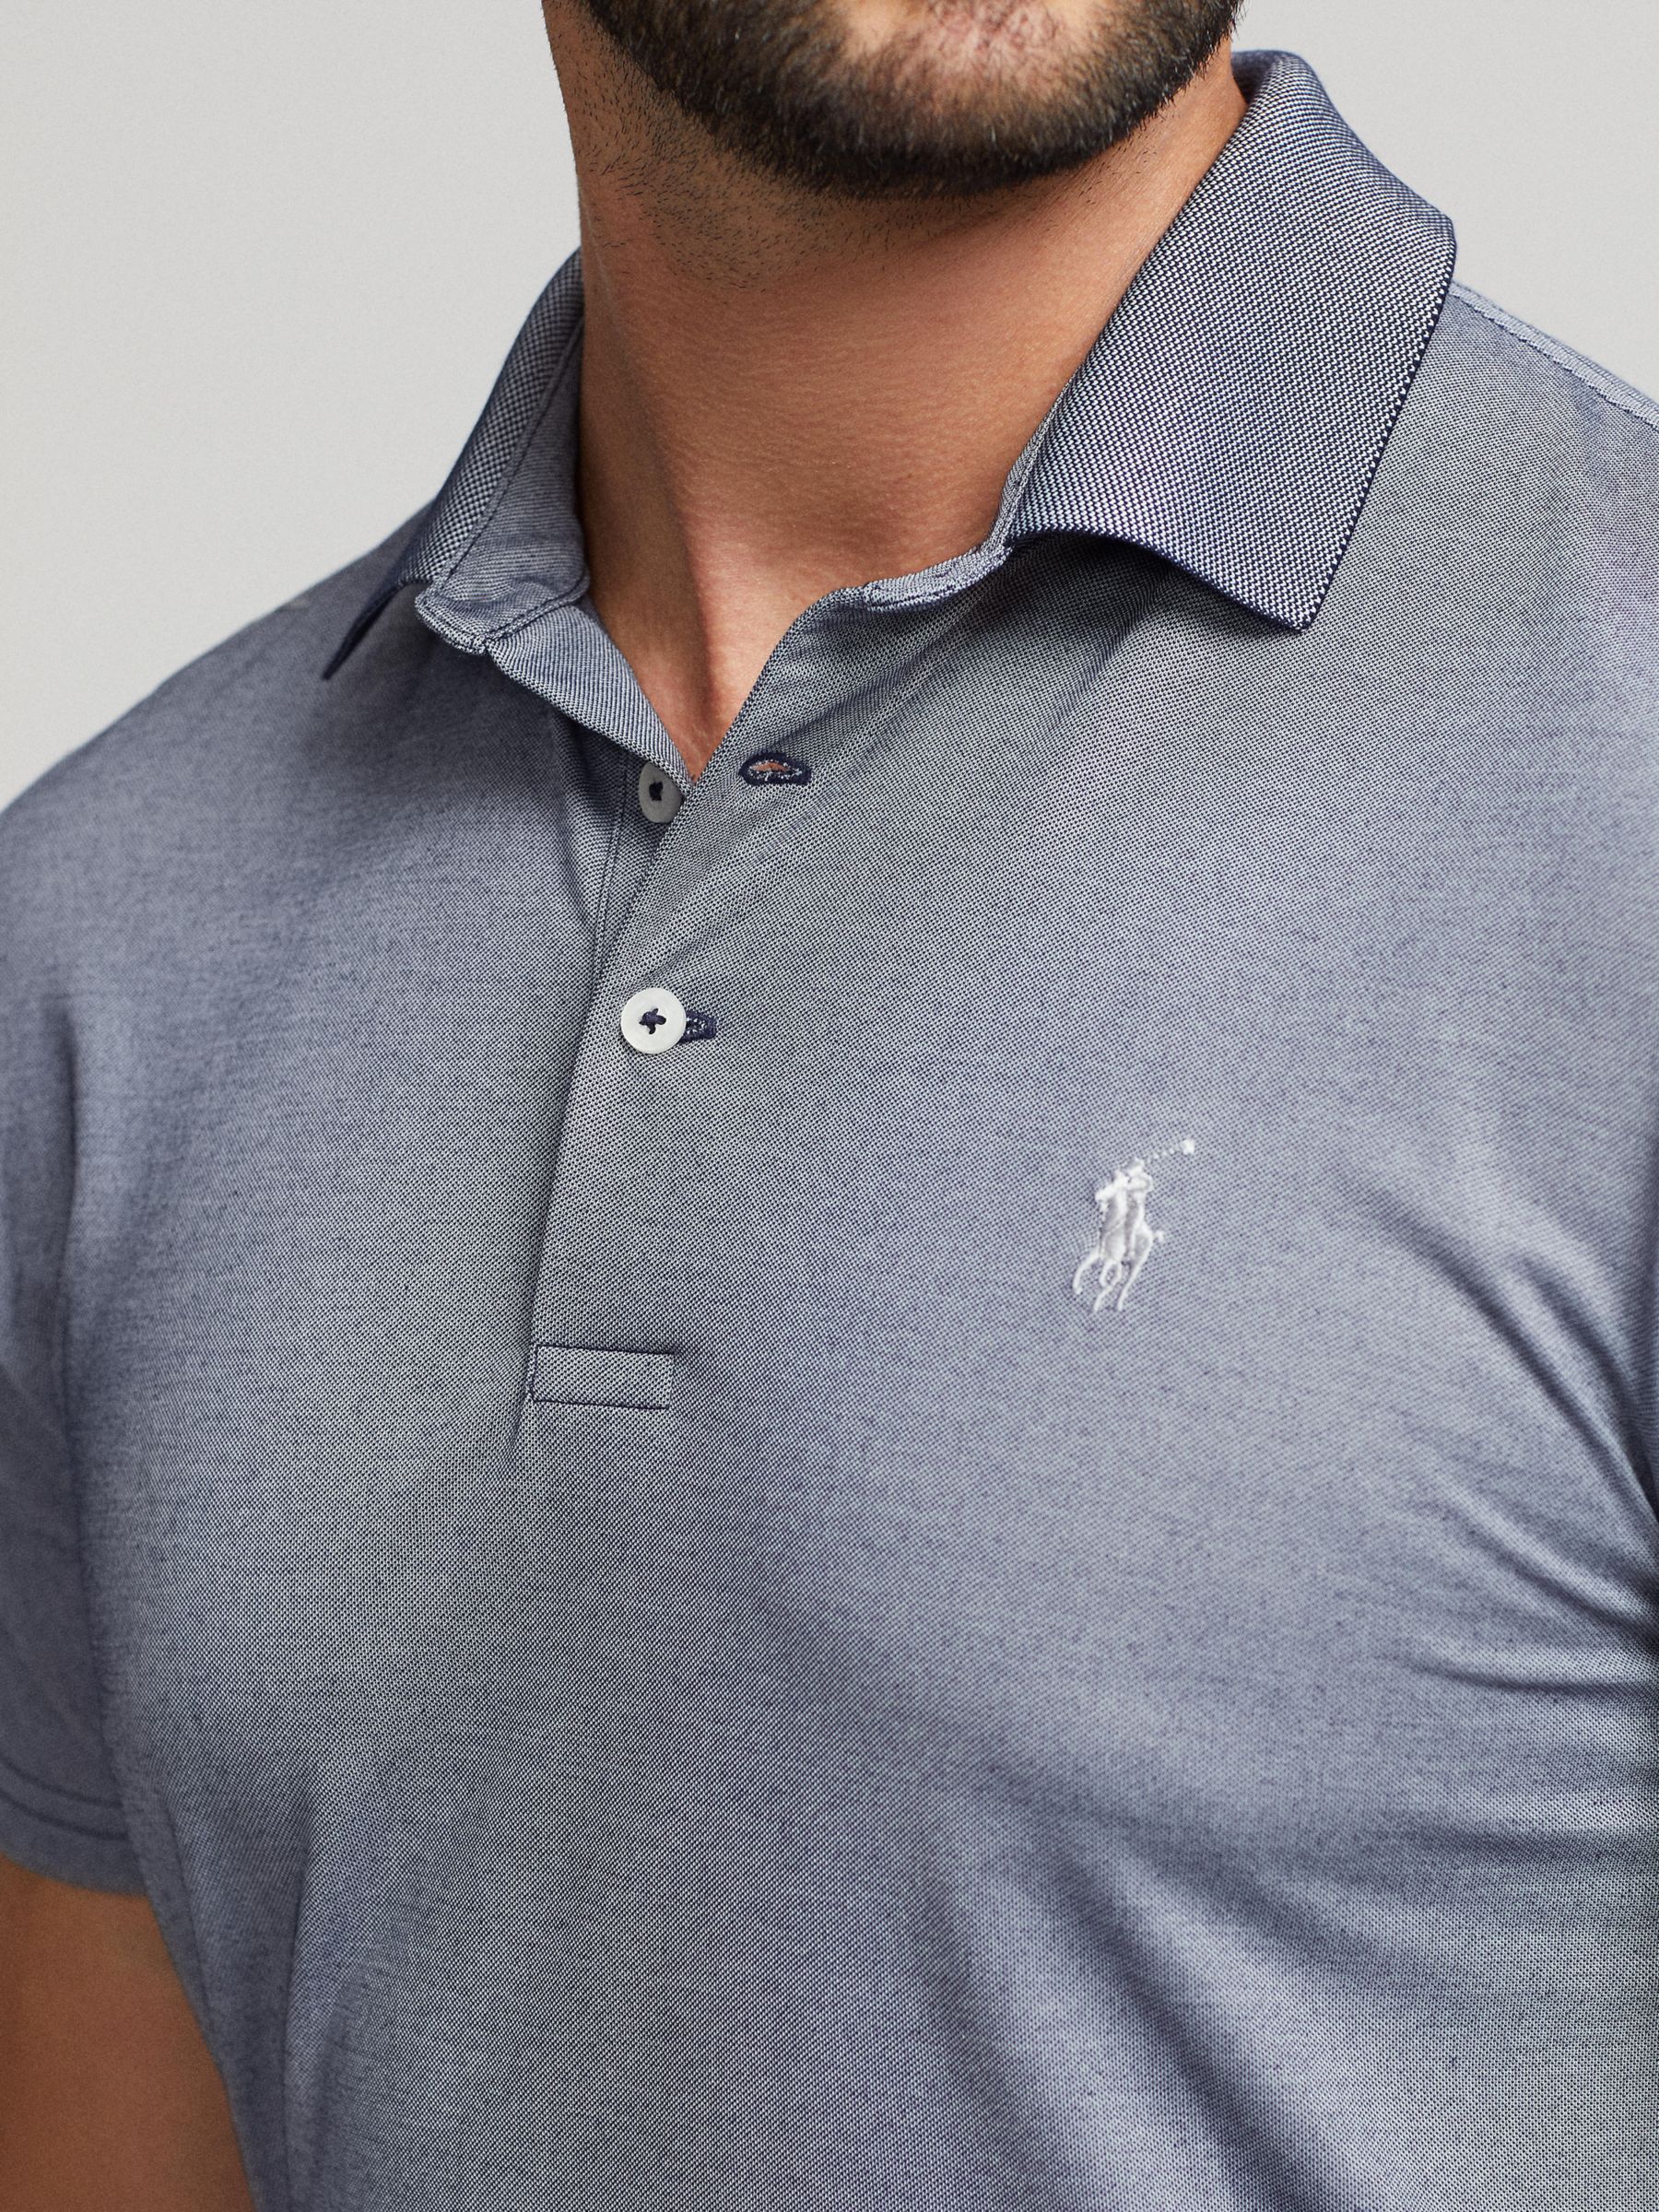 Polo Golf by Ralph Lauren Polo Shirt, French Navy at John Lewis